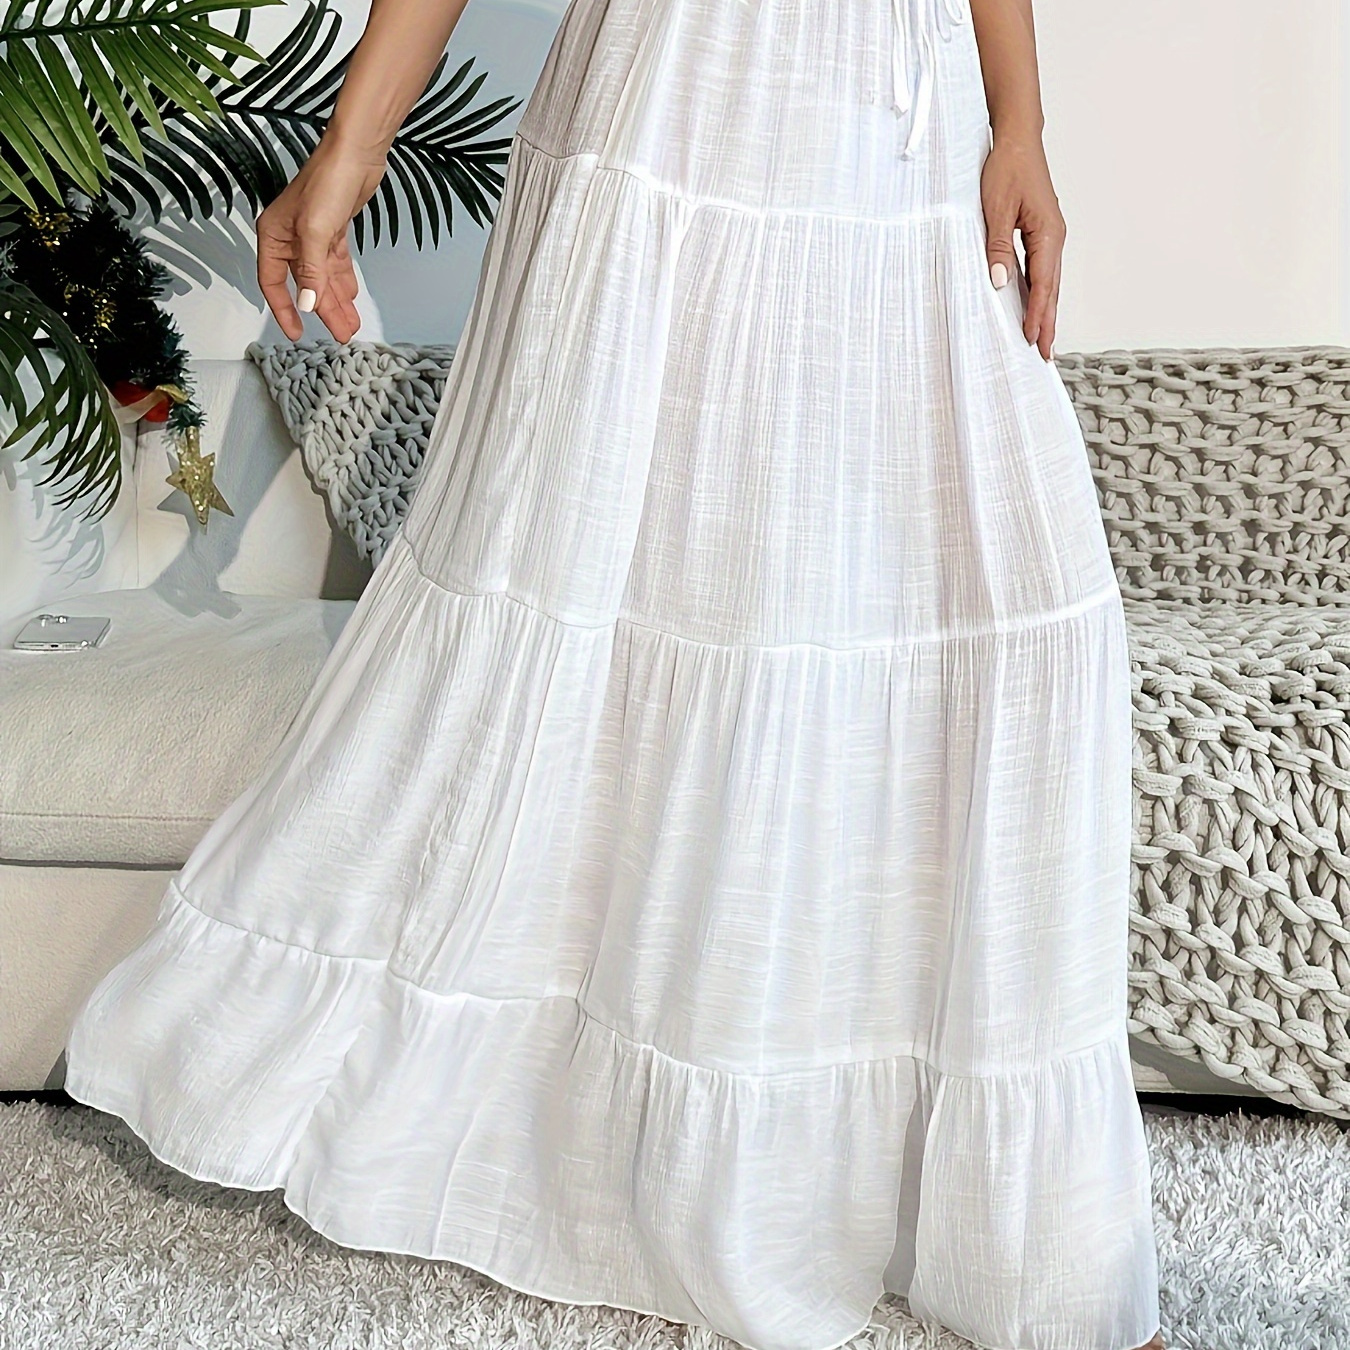 

Drawstring Waist Tiered Skirt, Chic Maxi Length A-line Skirt For Spring & Summer, Women's Clothing